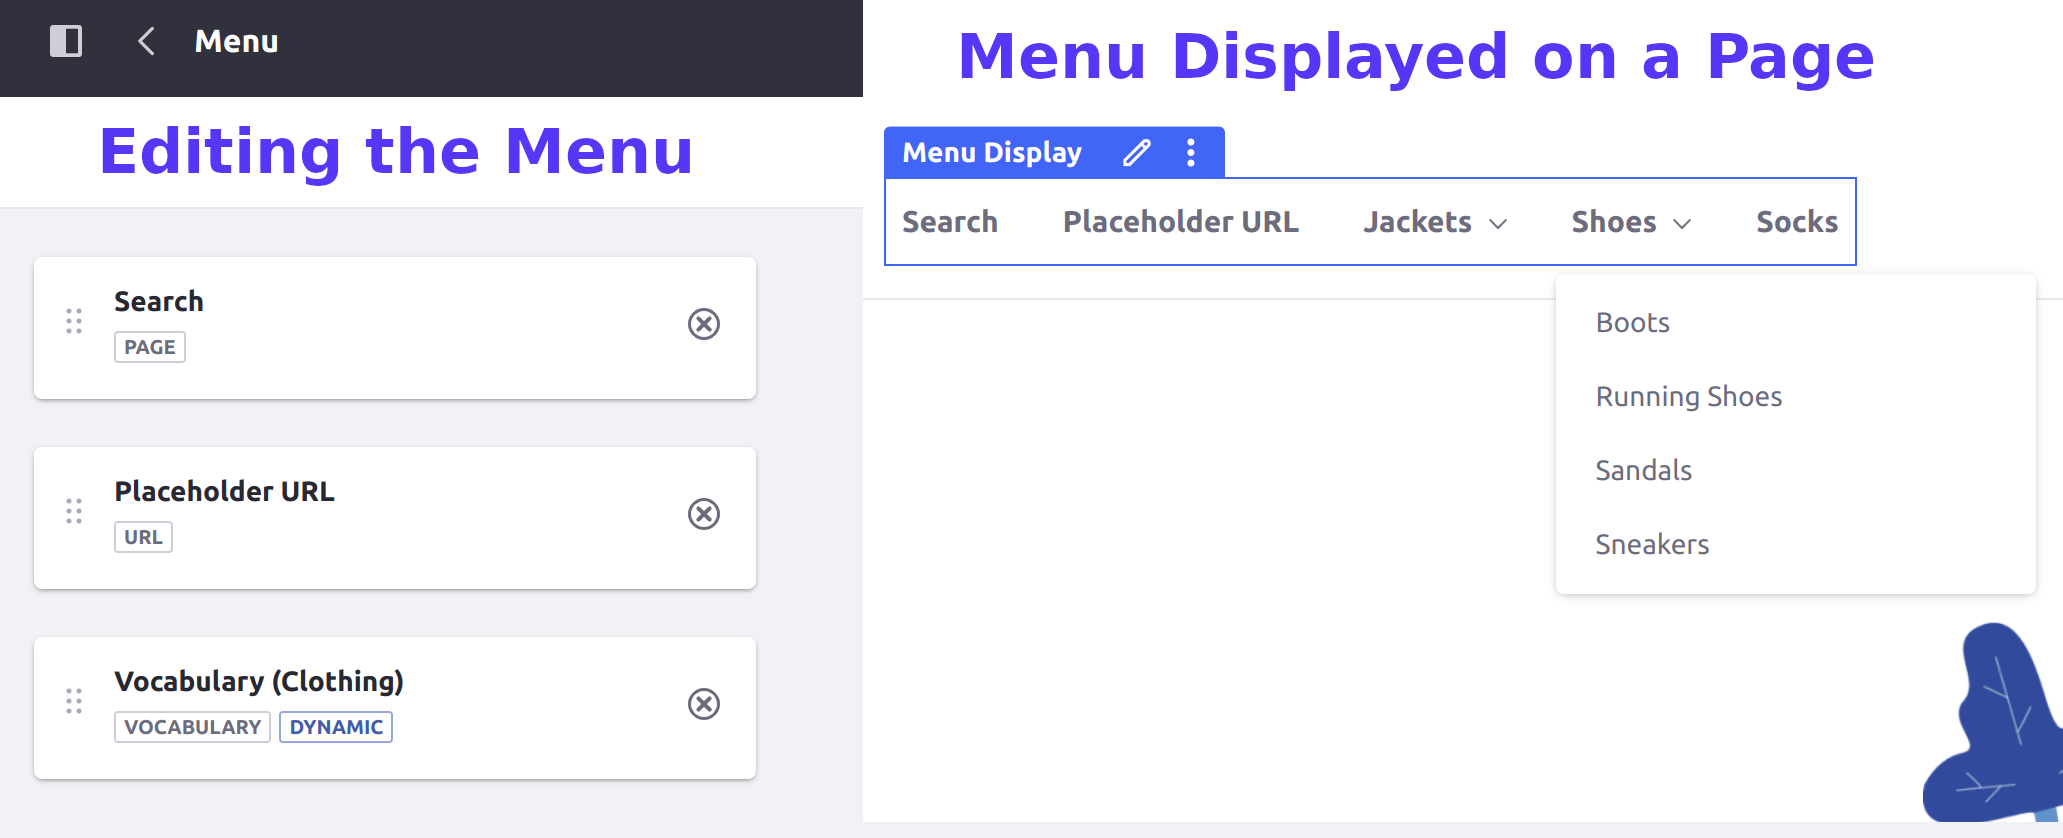 Dynamic vocabulary elements automatically update to reflect their hierarchy of categories in your navigation menus.